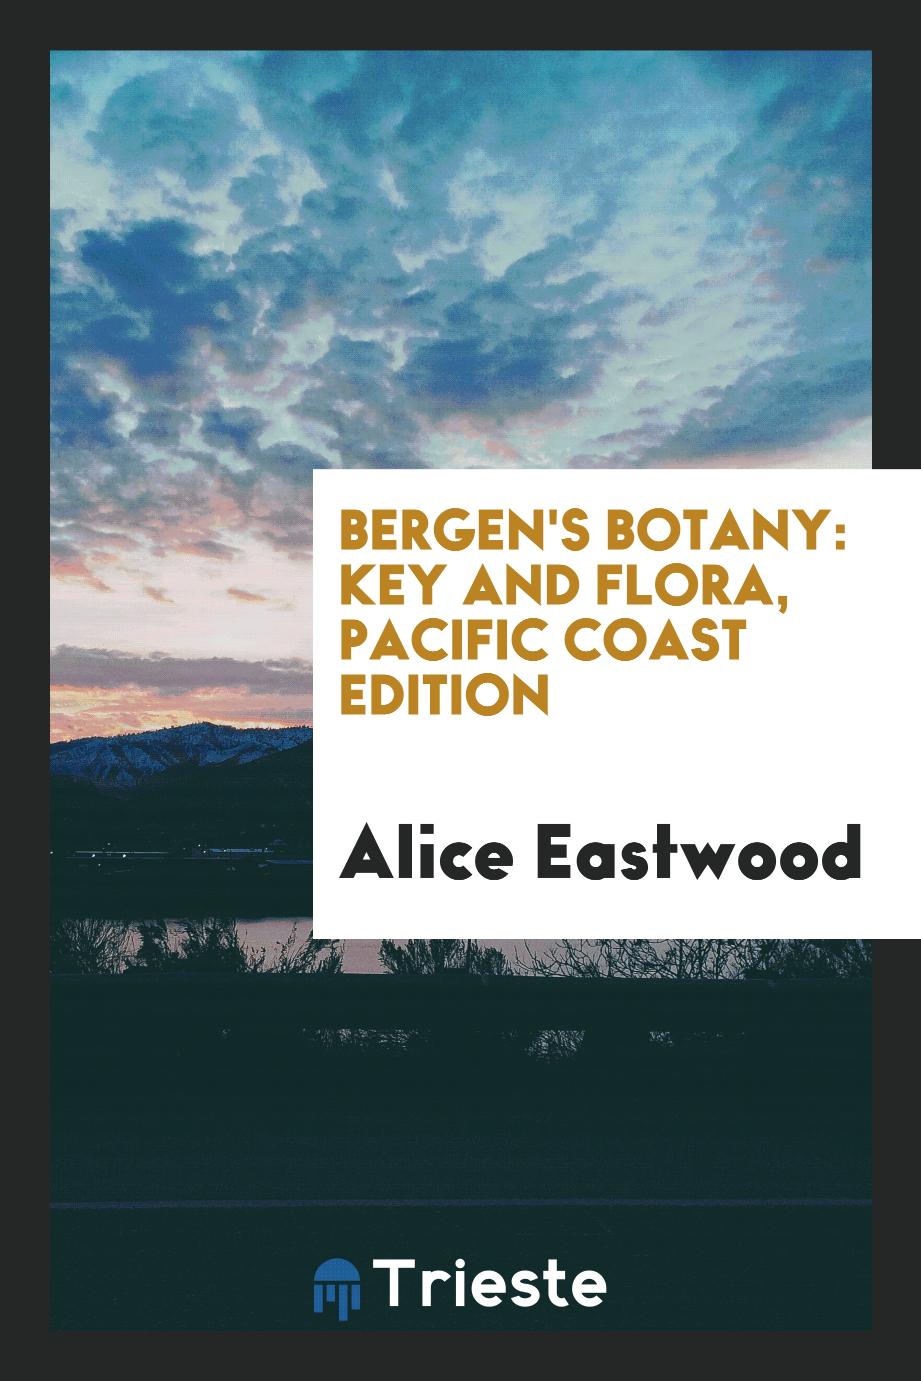 Alice Eastwood - Bergen's botany: key and flora, Pacific coast edition